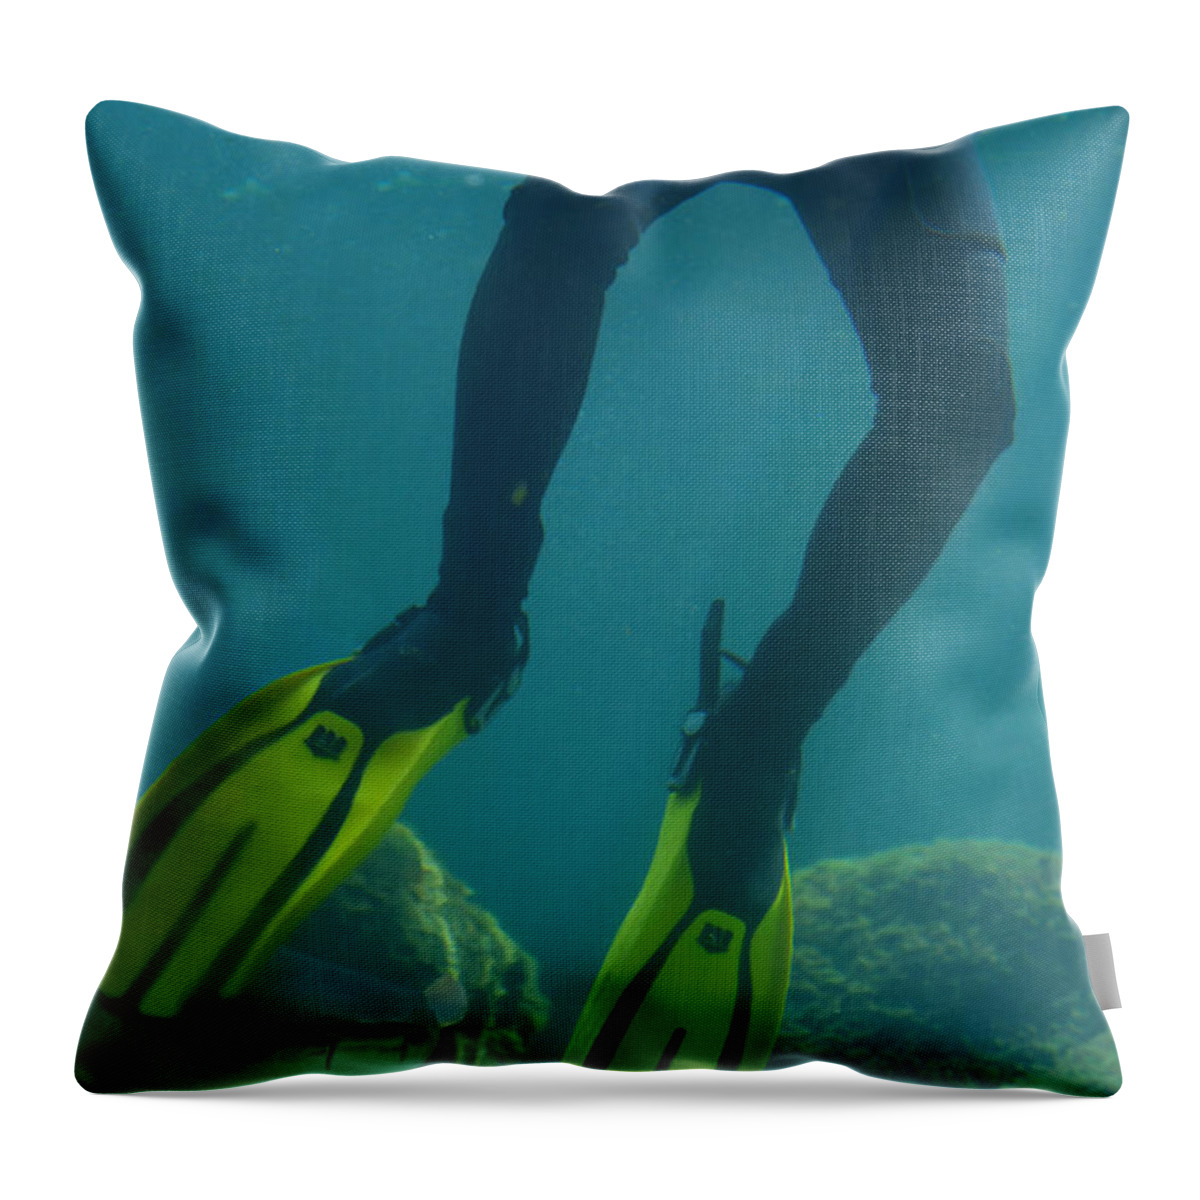 Frog Legs Throw Pillow featuring the photograph Frog Legs by Liane Wright